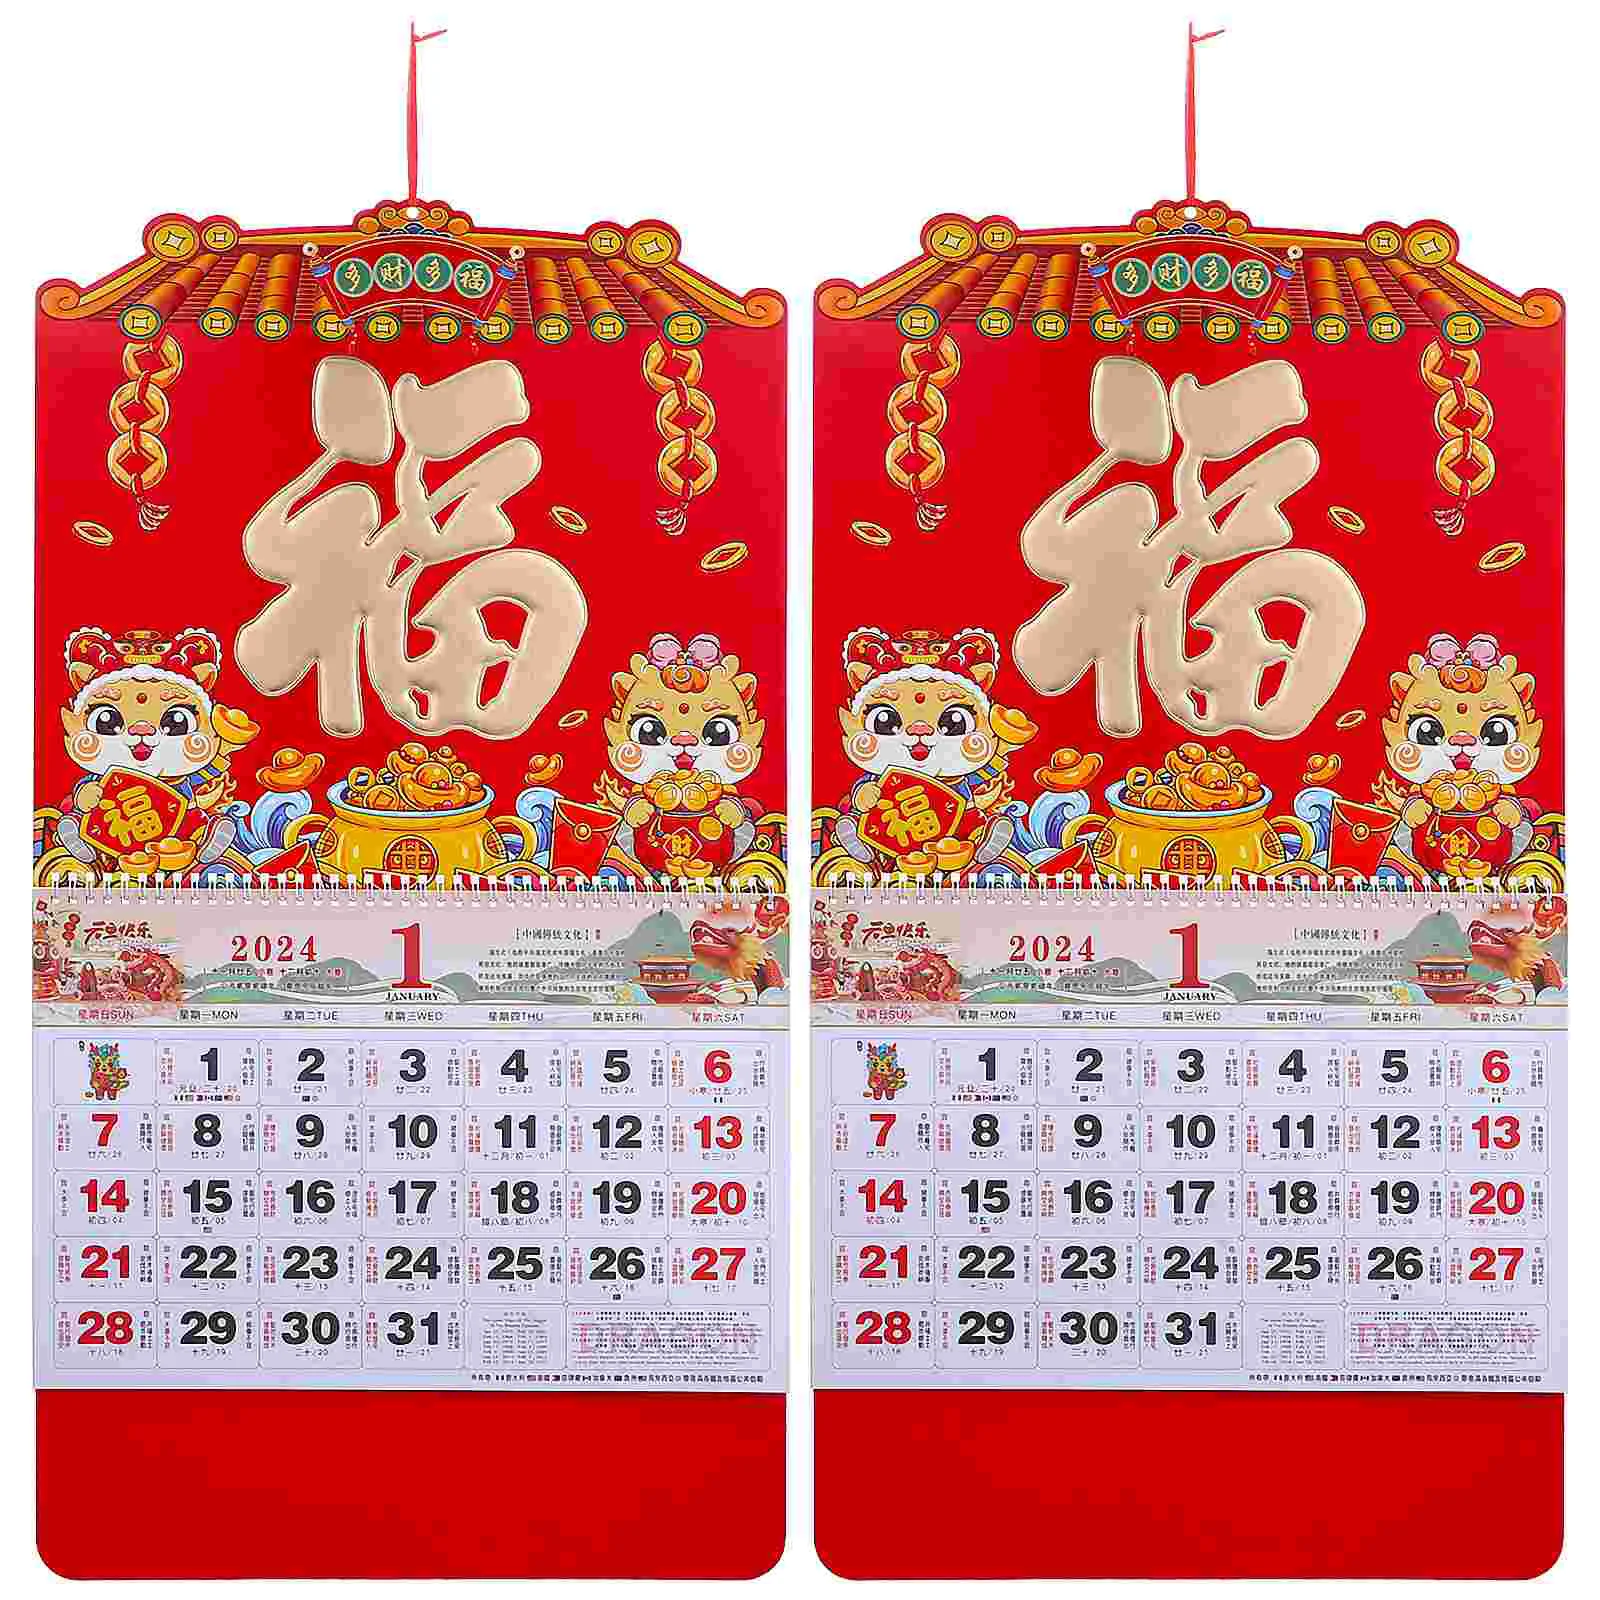 2 Pcs 2024 Year of The Dragon Gilded Wall Calendar with Blessing Characters Books Chinese Home Decor Style Hanging New Decorate